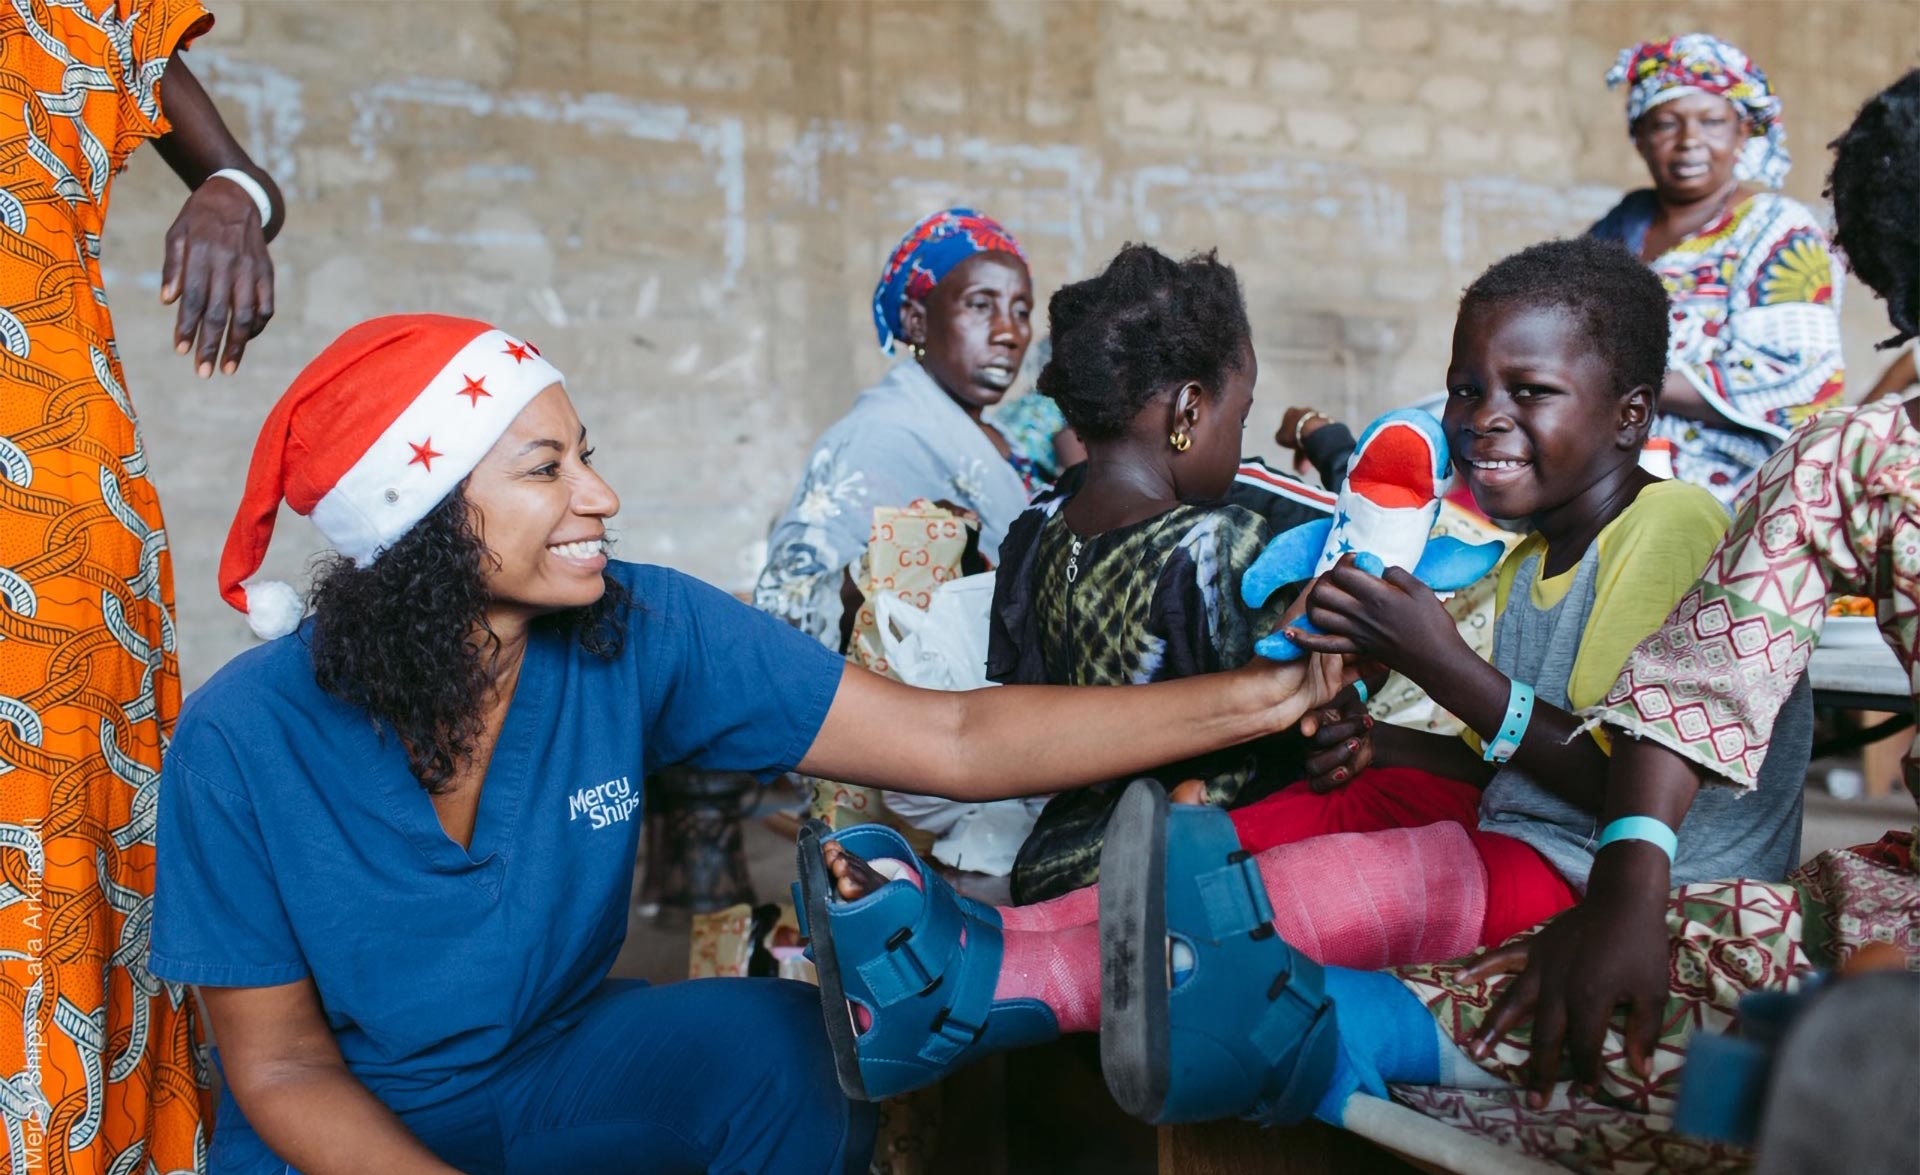 Daniela Neves switched to volunteer work for the Mercy Ships Foundation in Dakar